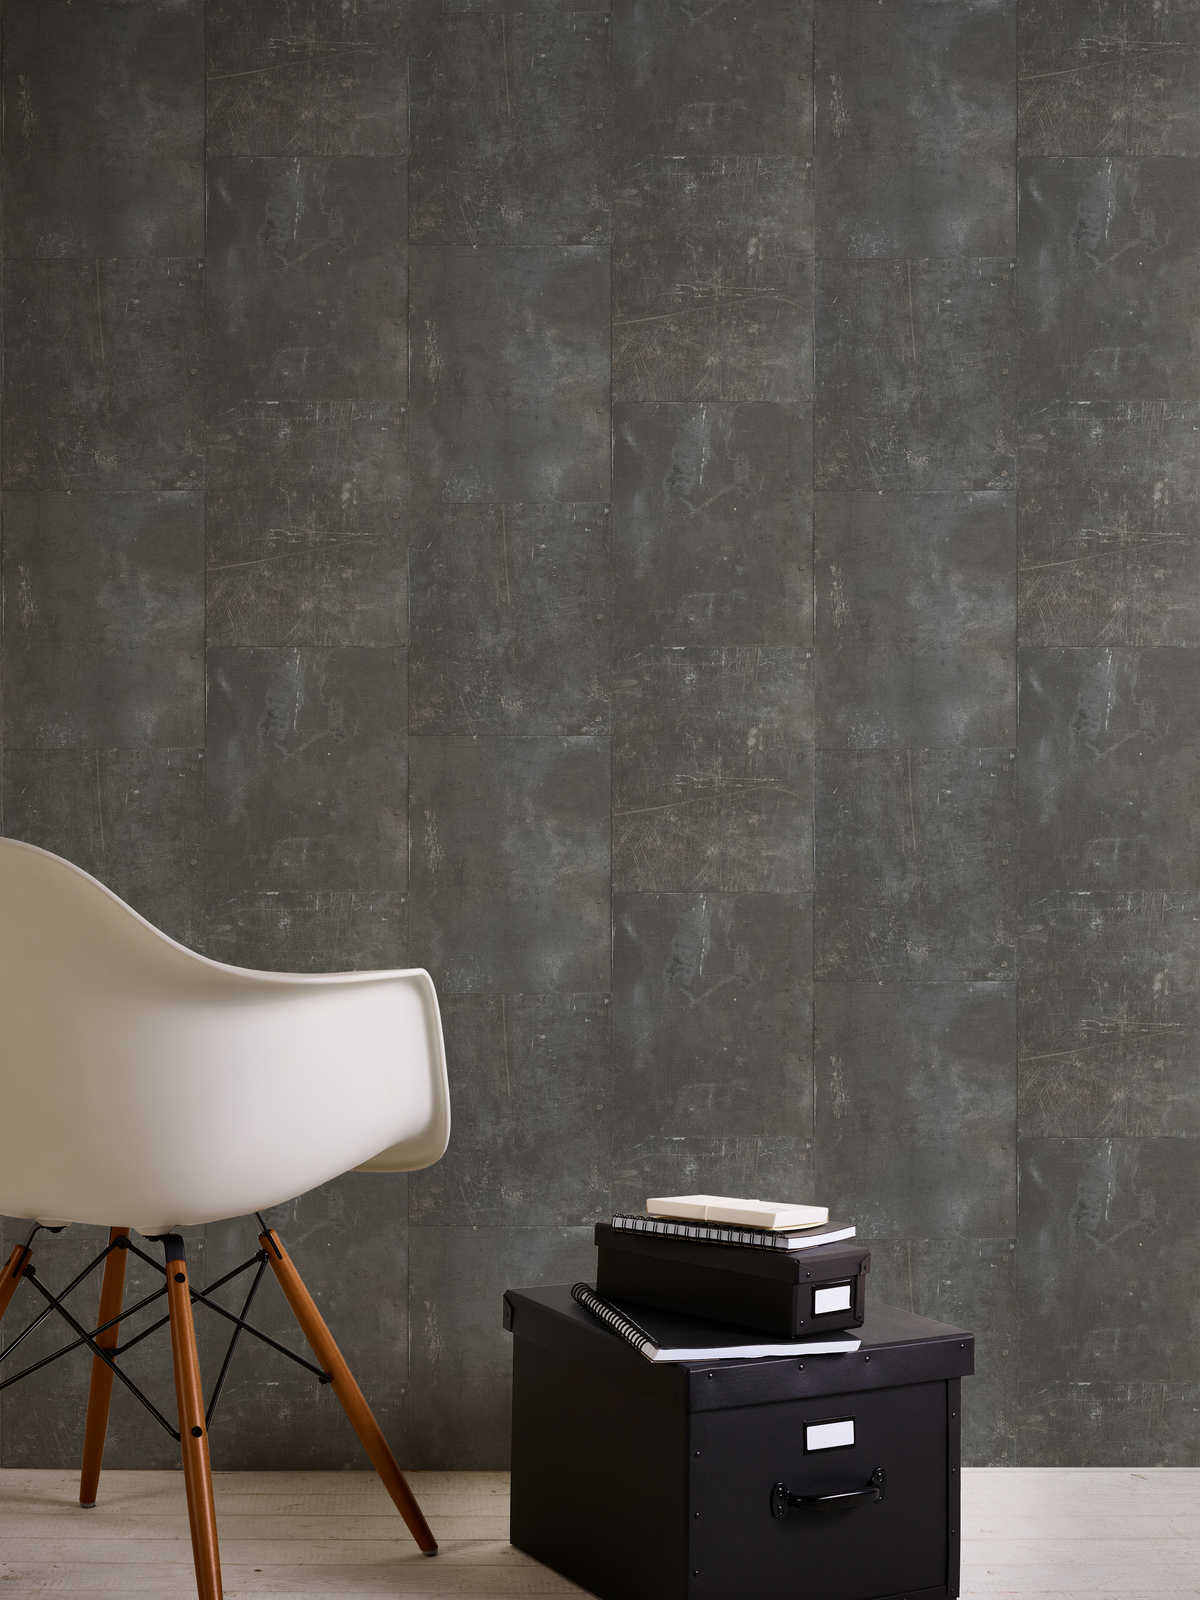             Wallpaper industrial design with metal plates & rivets - brown
        